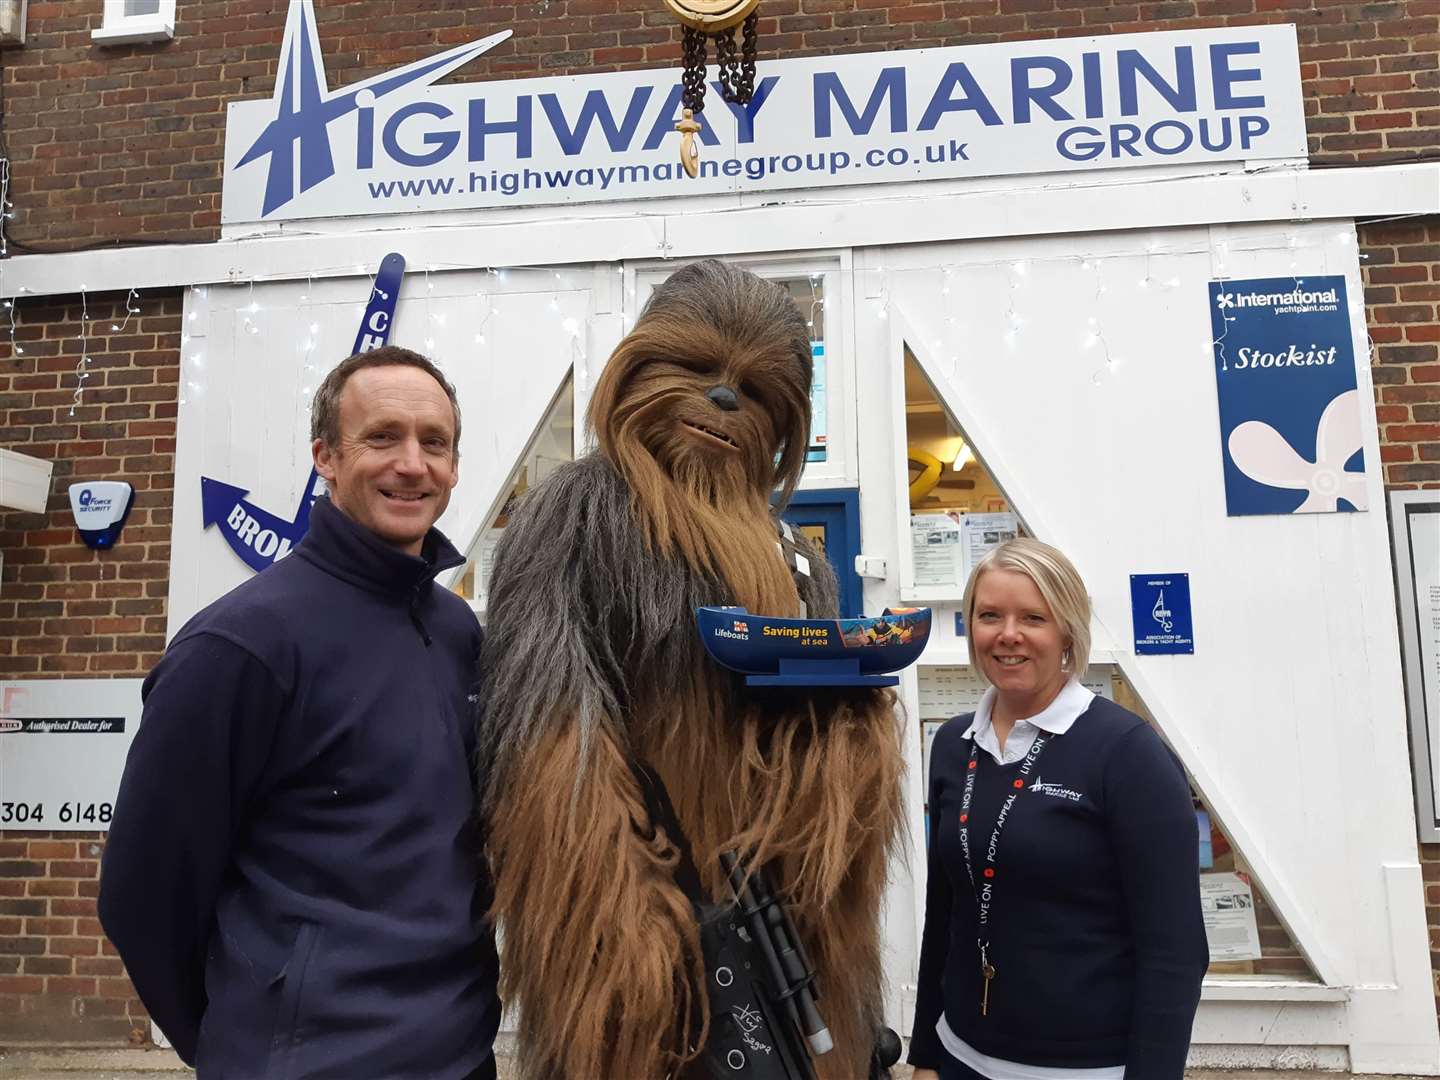 Chewbacca with Highway Marine director James Blackmore and officer manager Philippa Holt (6015612)